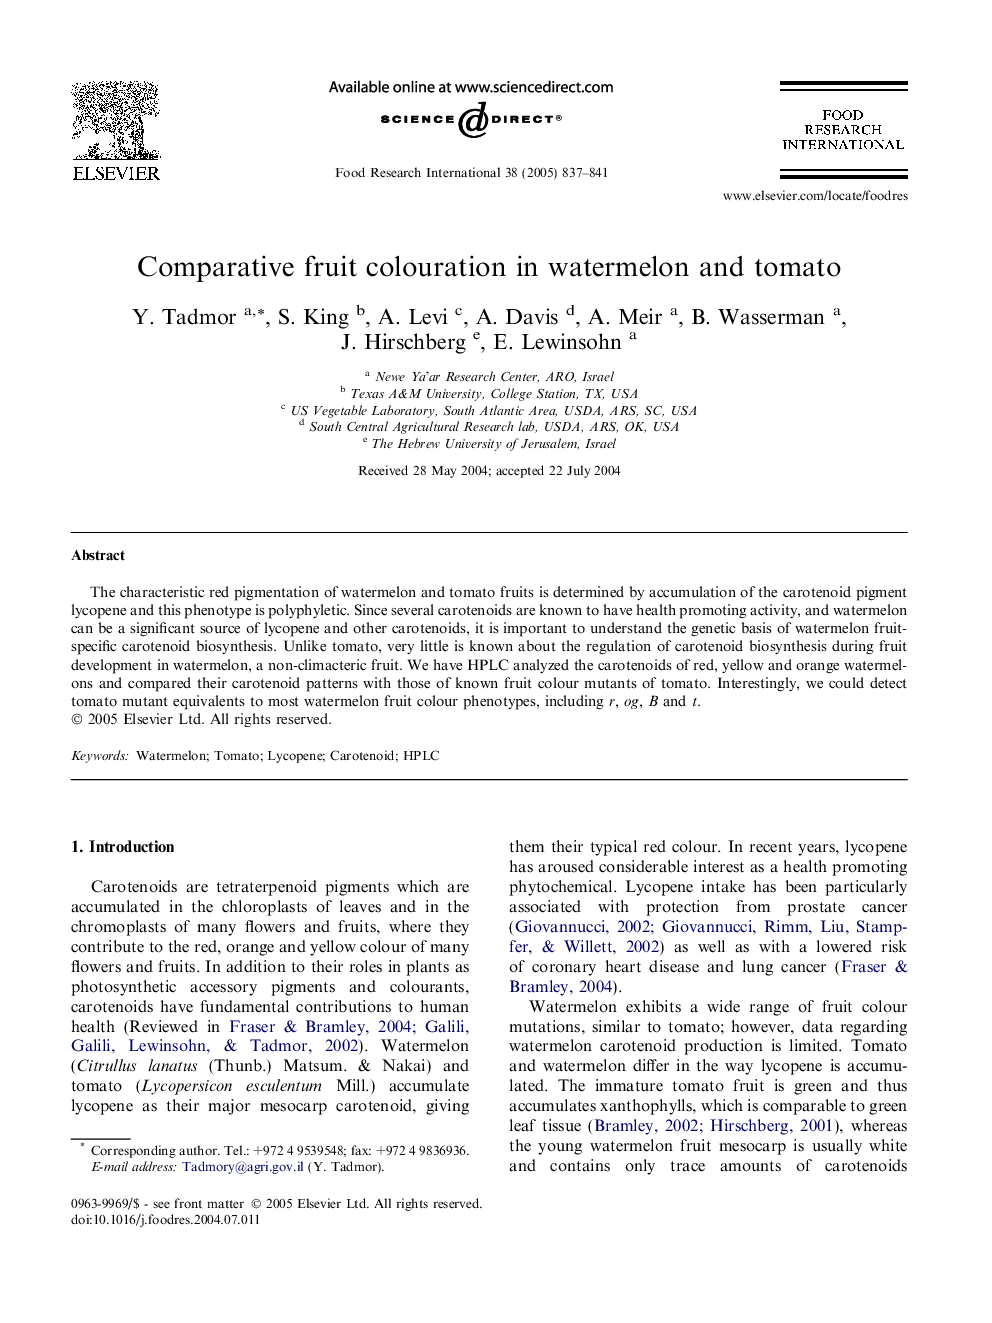 Comparative fruit colouration in watermelon and tomato